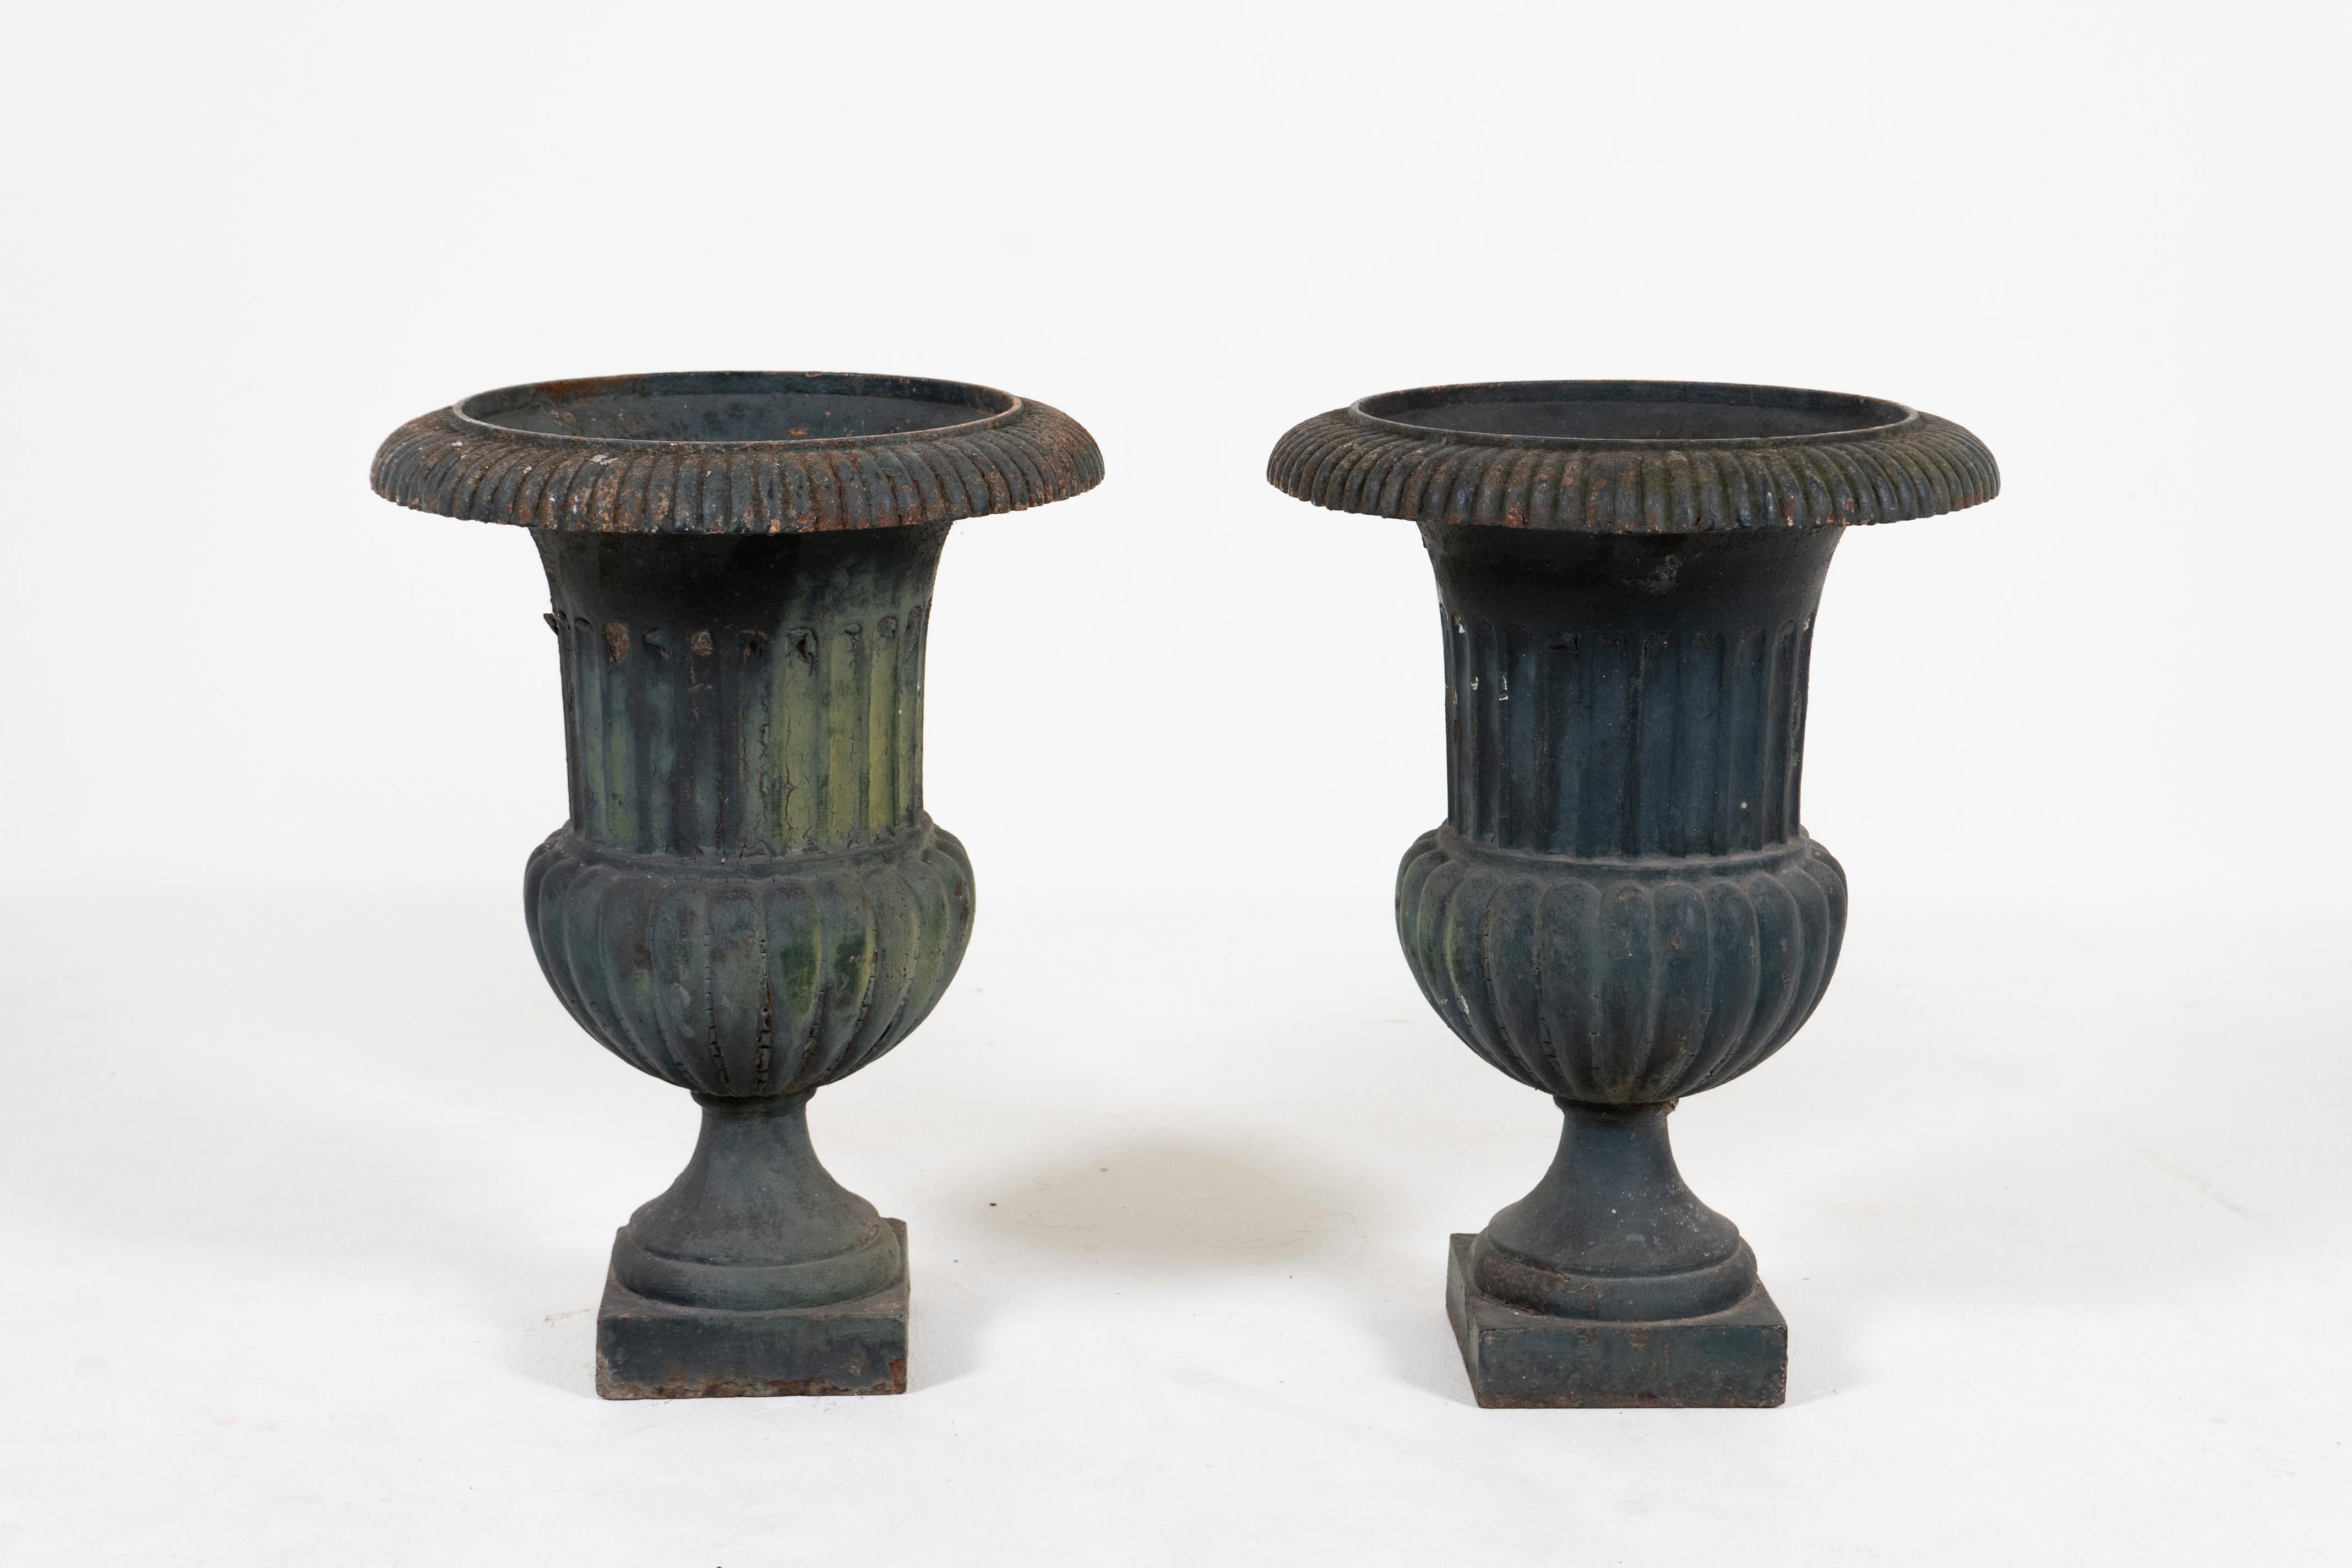 A superb pair of antique French cast iron garden urn planters circa 1880. These elegant campana jardinieres are the quintessential classic French garden urns. While originally used outdoors these can be used indoors as dramatic accessories to